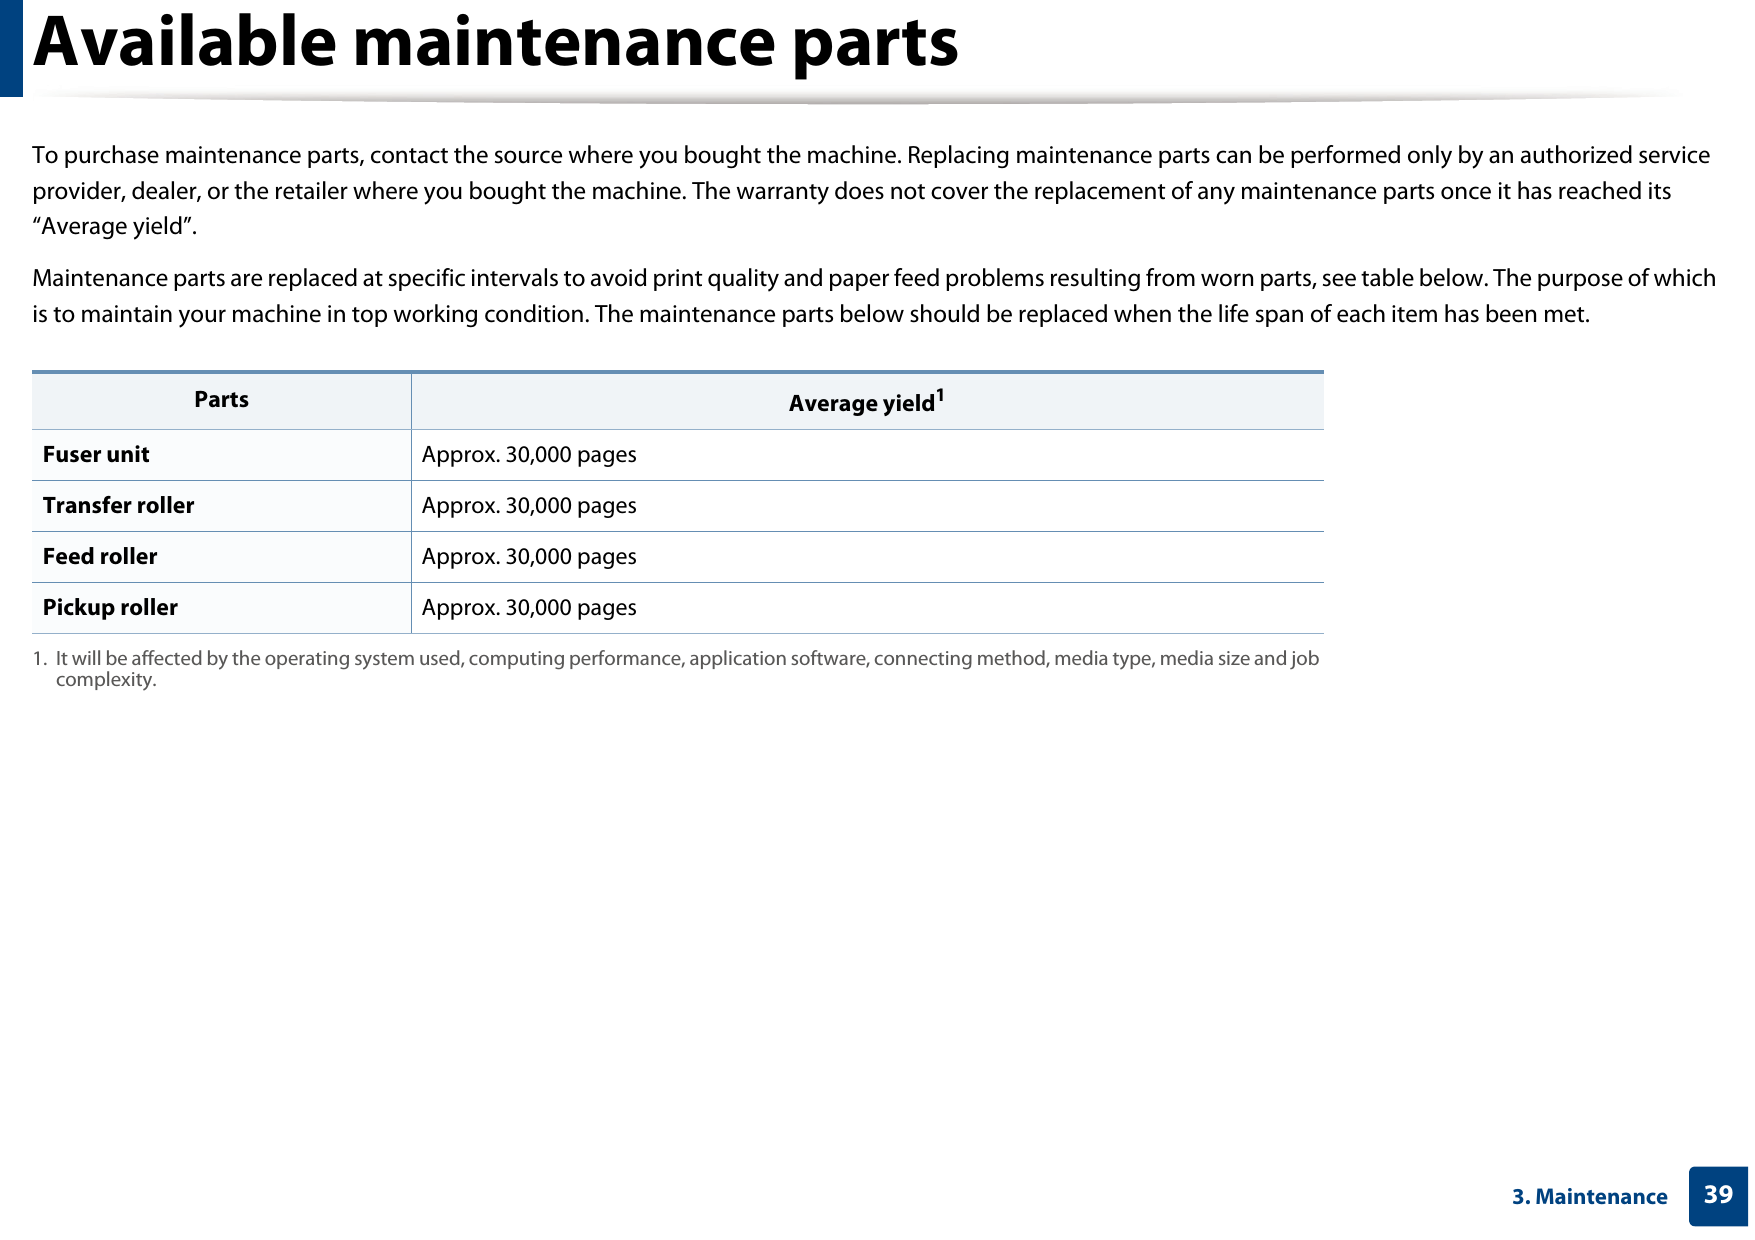 393. MaintenanceAvailable maintenance partsTo purchase maintenance parts, contact the source where you bought the machine. Replacing maintenance parts can be performed only by an authorized service provider, dealer, or the retailer where you bought the machine. The warranty does not cover the replacement of any maintenance parts once it has reached its “Average yield”.Maintenance parts are replaced at specific intervals to avoid print quality and paper feed problems resulting from worn parts, see table below. The purpose of which is to maintain your machine in top working condition. The maintenance parts below should be replaced when the life span of each item has been met.Parts Average yield11. It will be affected by the operating system used, computing performance, application software, connecting method, media type, media size and job complexity.Fuser unit Approx. 30,000 pagesTransfer roller Approx. 30,000 pages Feed roller Approx. 30,000 pages Pickup roller Approx. 30,000 pages